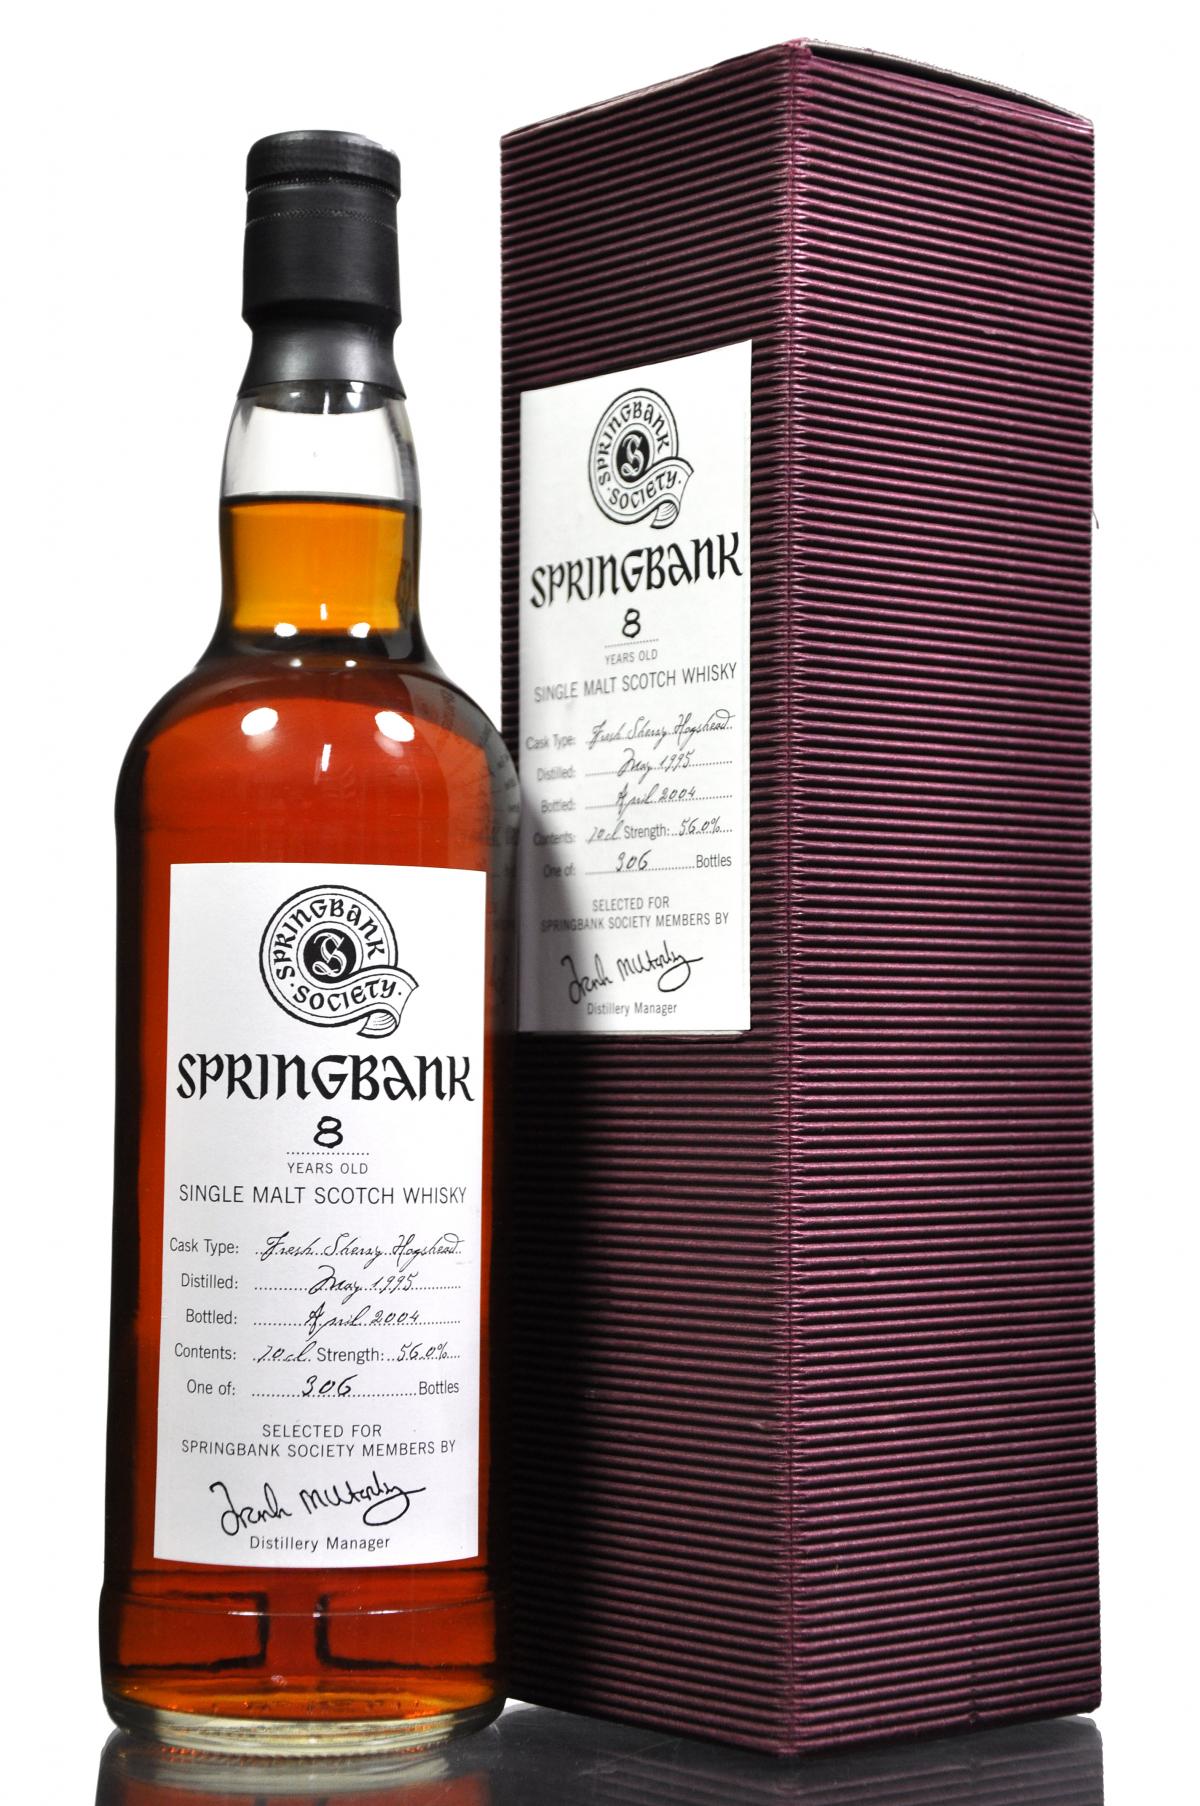 Springbank 1995-2004 - 8 Year Old - Society Exclusive